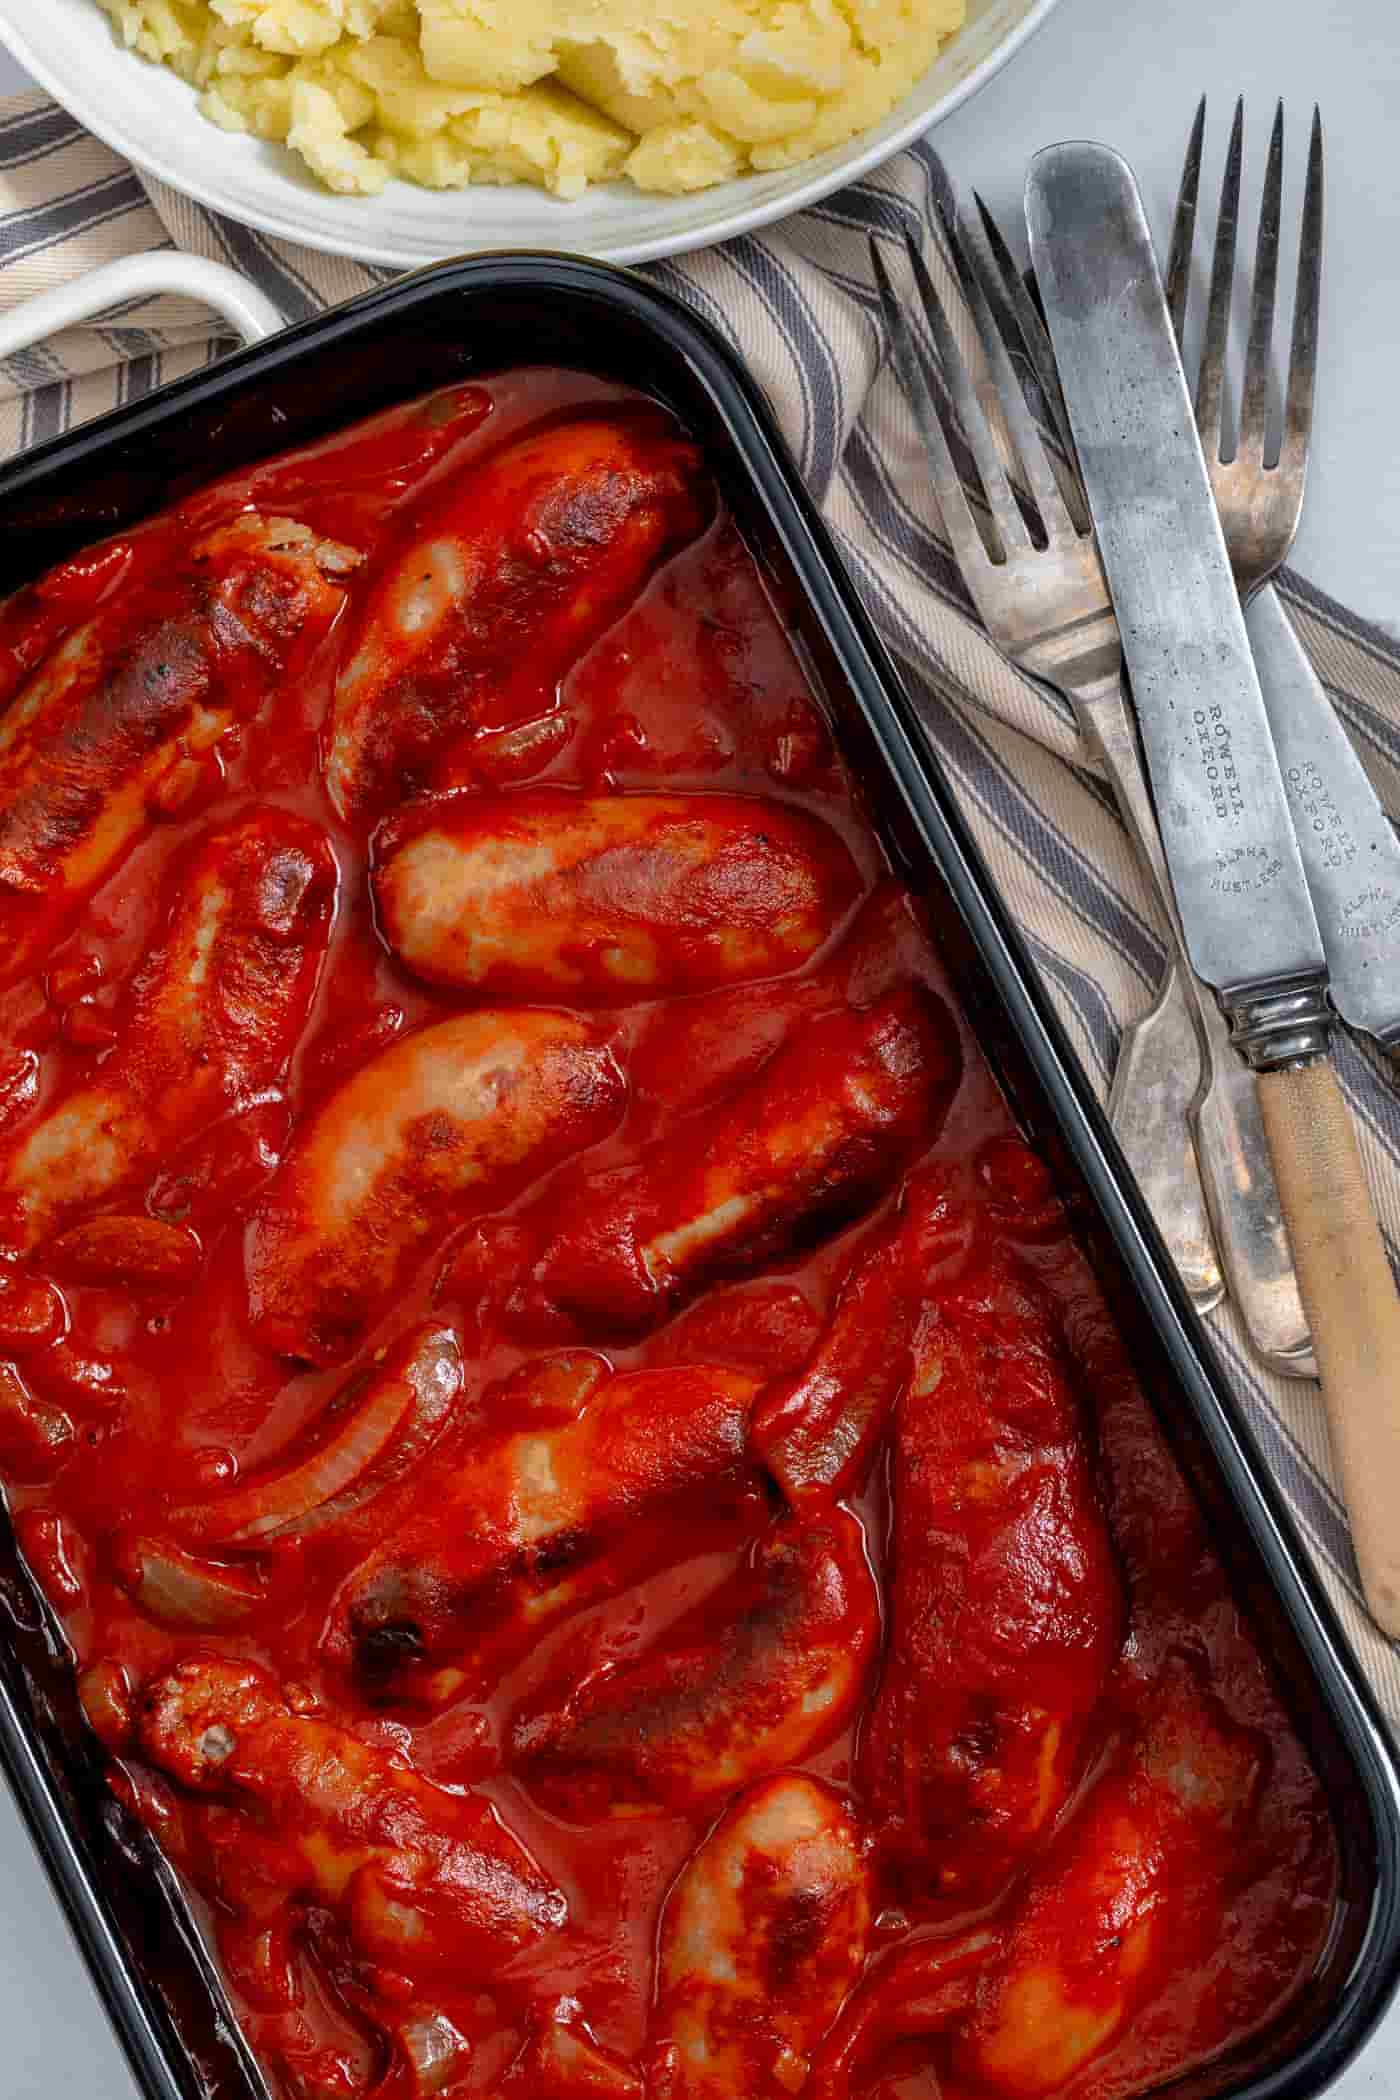 slow cooker sausage casserole in a black enamel baking dish on a striped grey and cream napkin. Knives and forks are to the side with a bowl of mashed potatoes at the top.